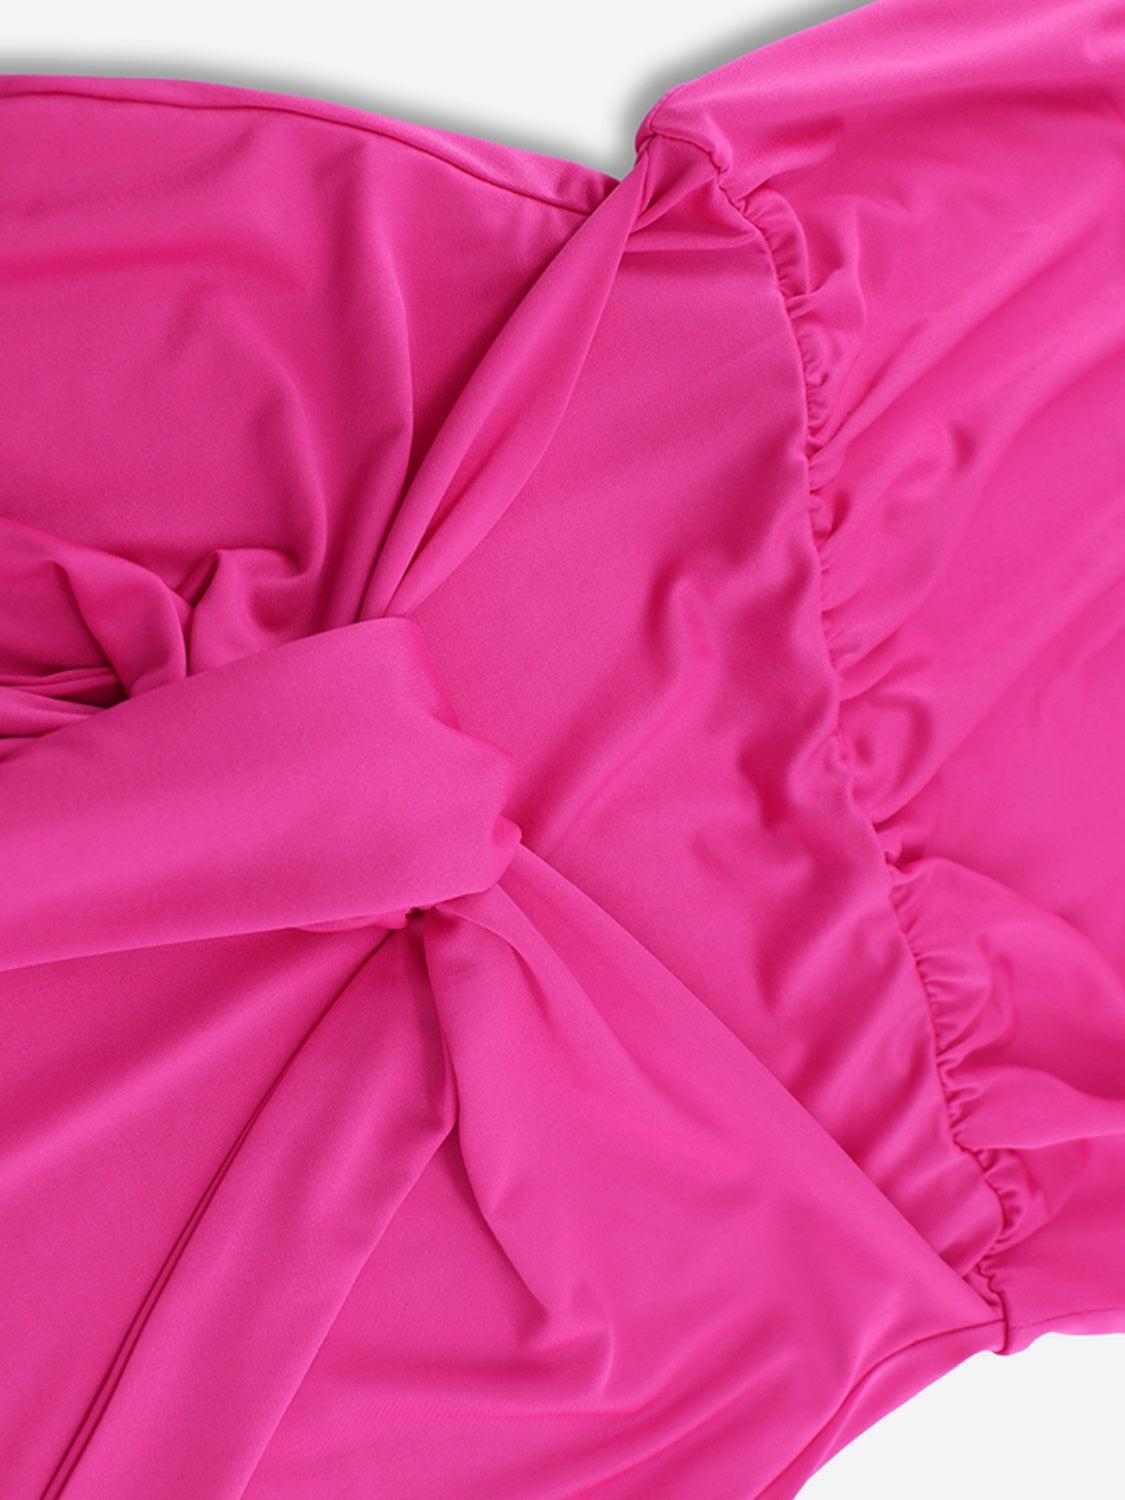 a close up of a pink dress on a white surface